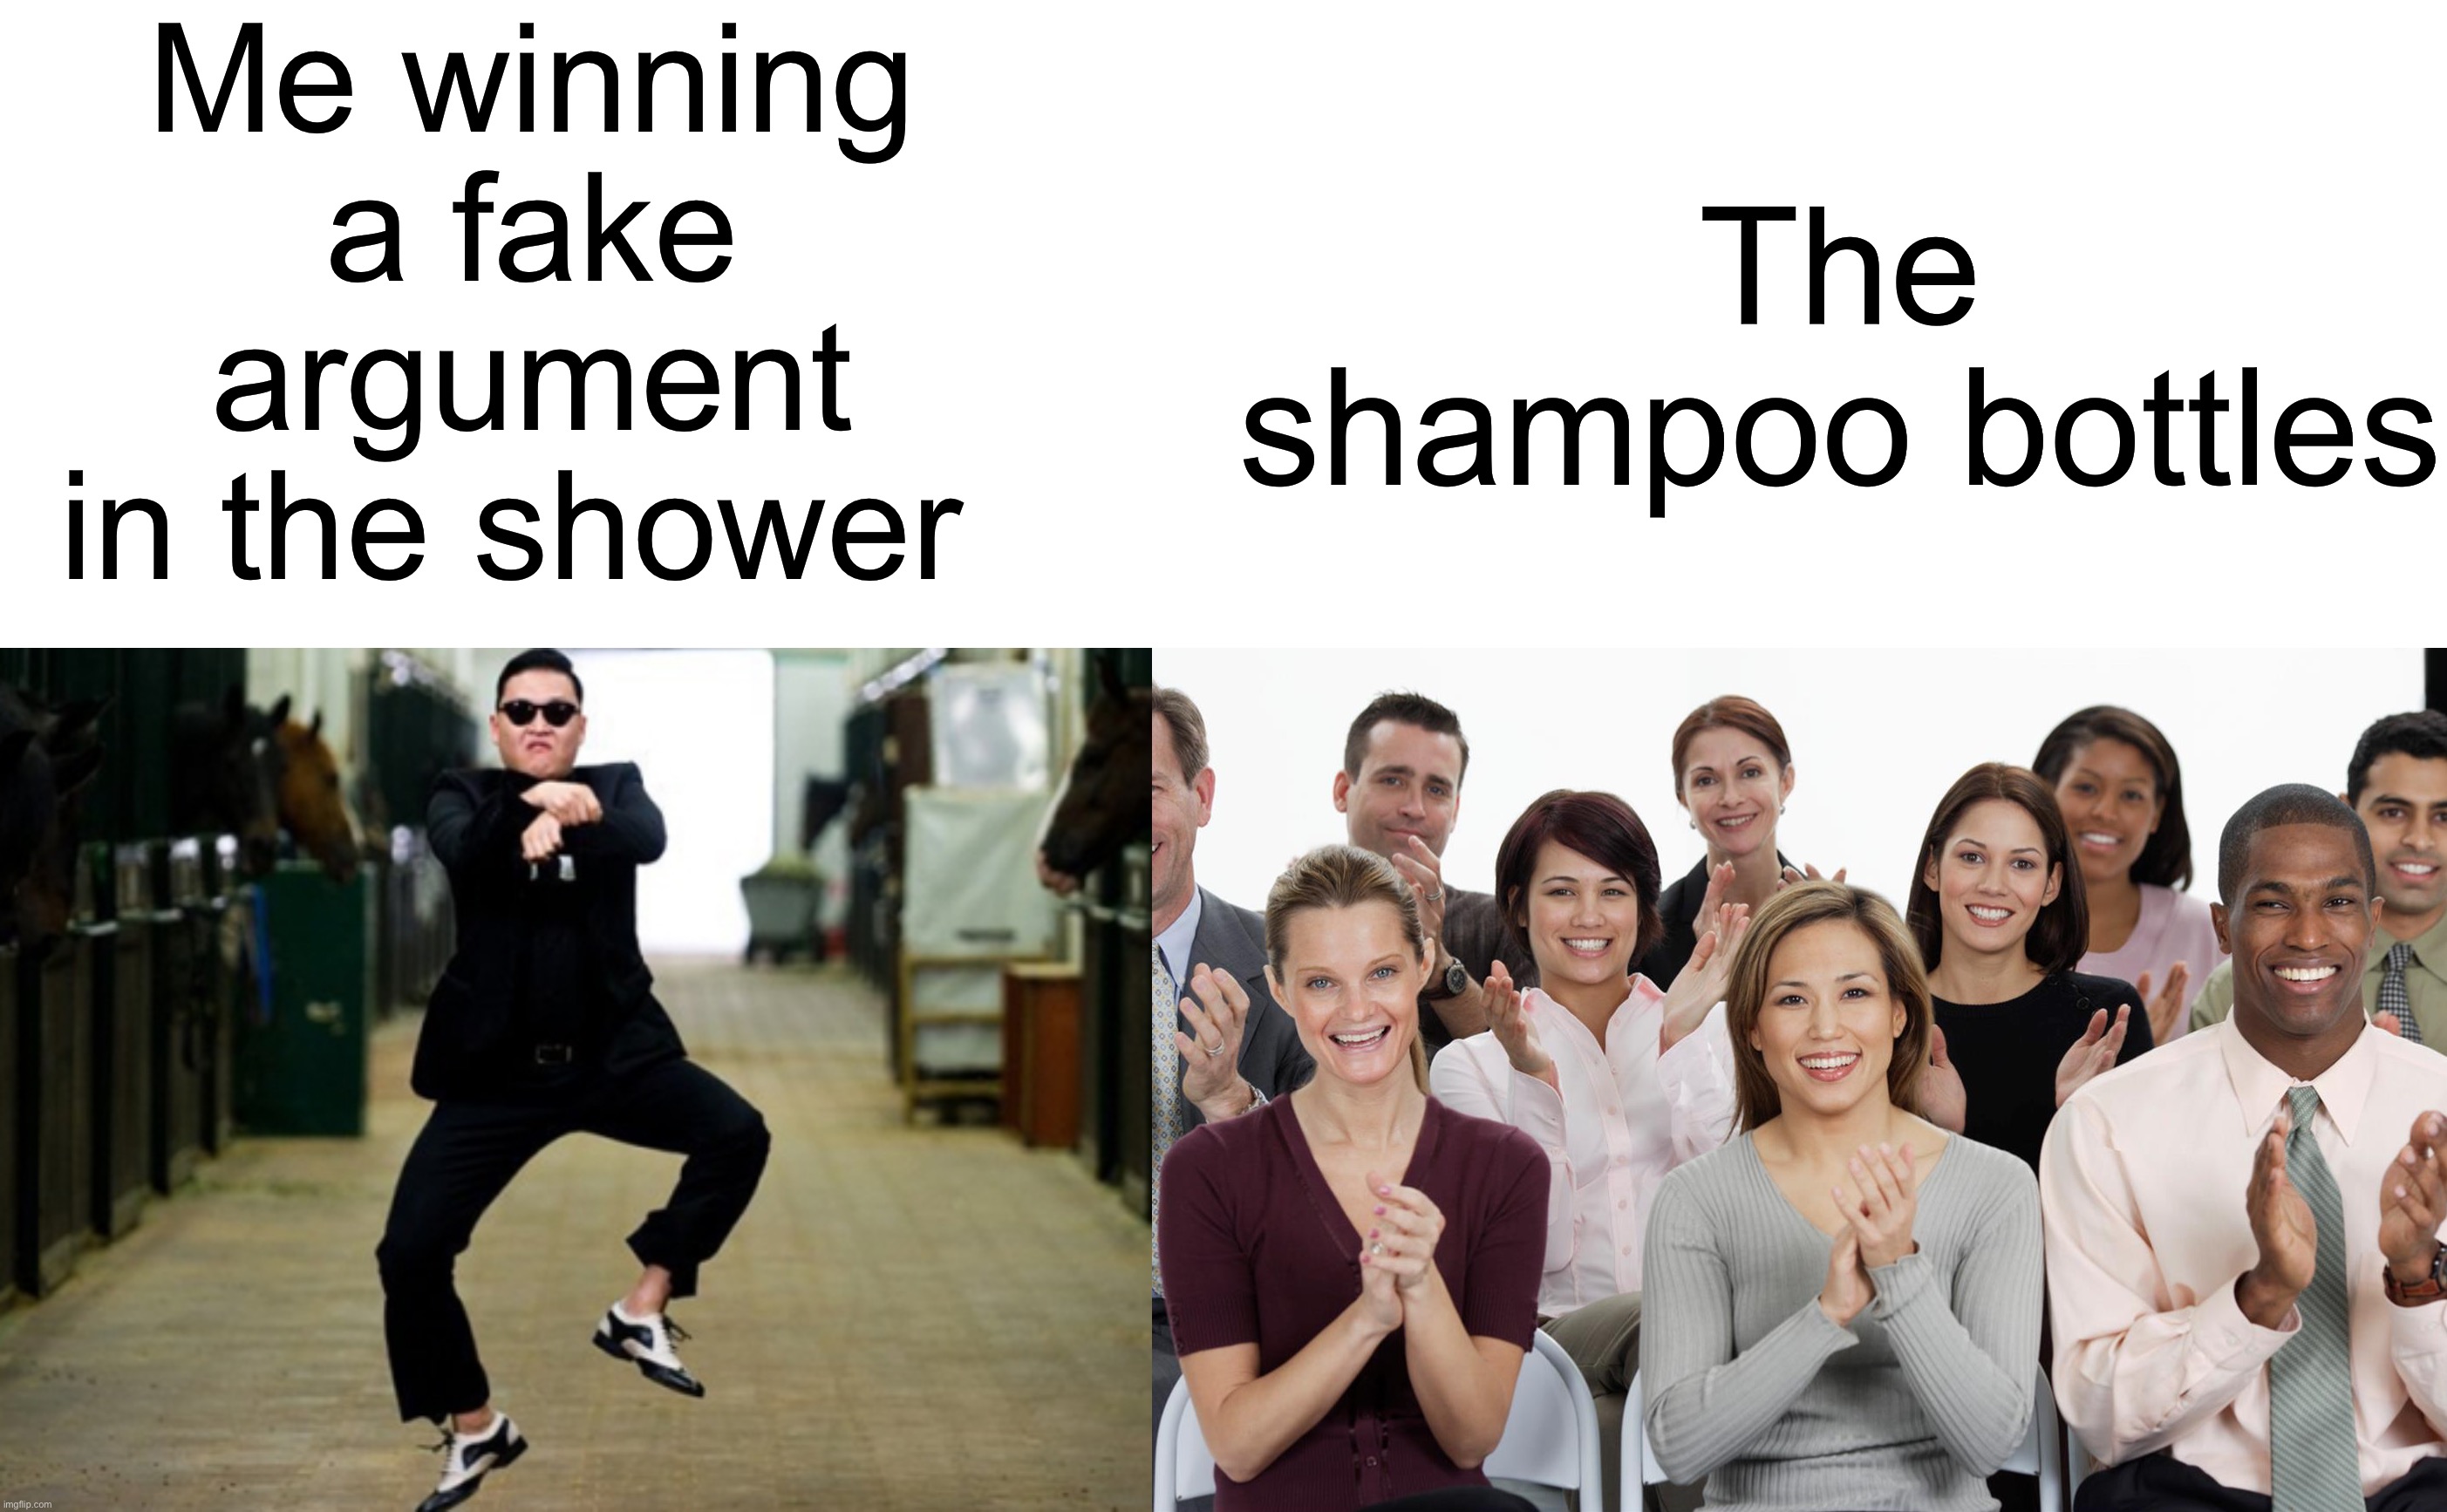 Accurate tbh | Me winning a fake argument in the shower; The shampoo bottles | image tagged in memes,psy horse dance,people clapping,funny,true story,relatable memes | made w/ Imgflip meme maker